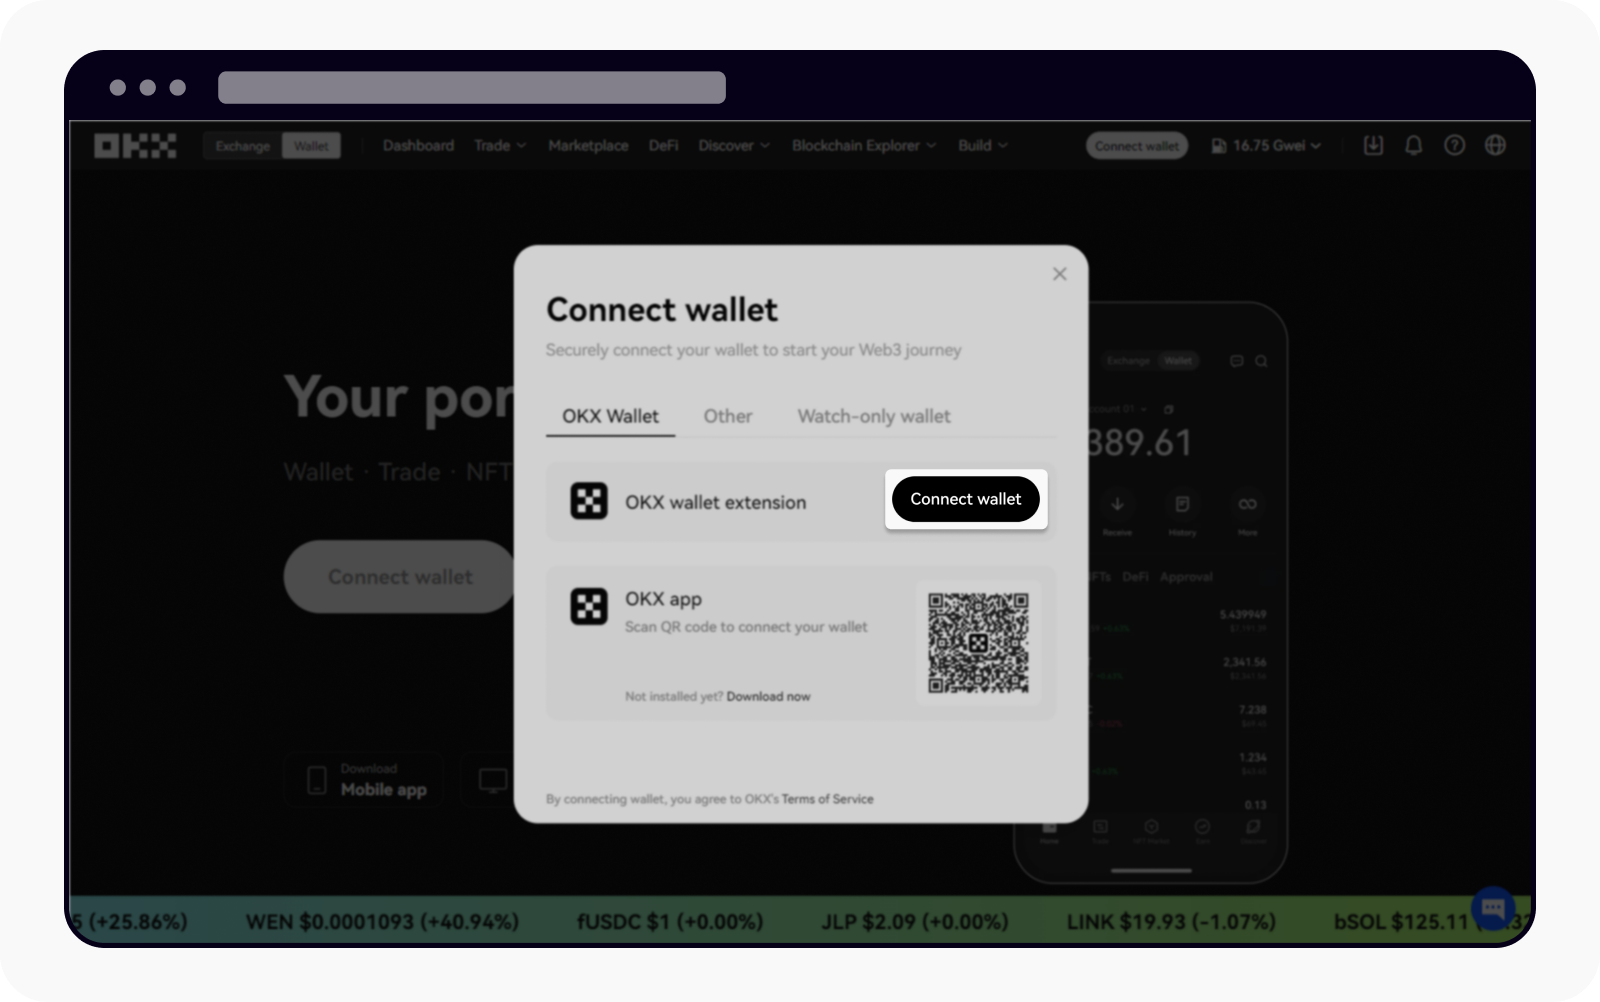 Opening Connect wallet page